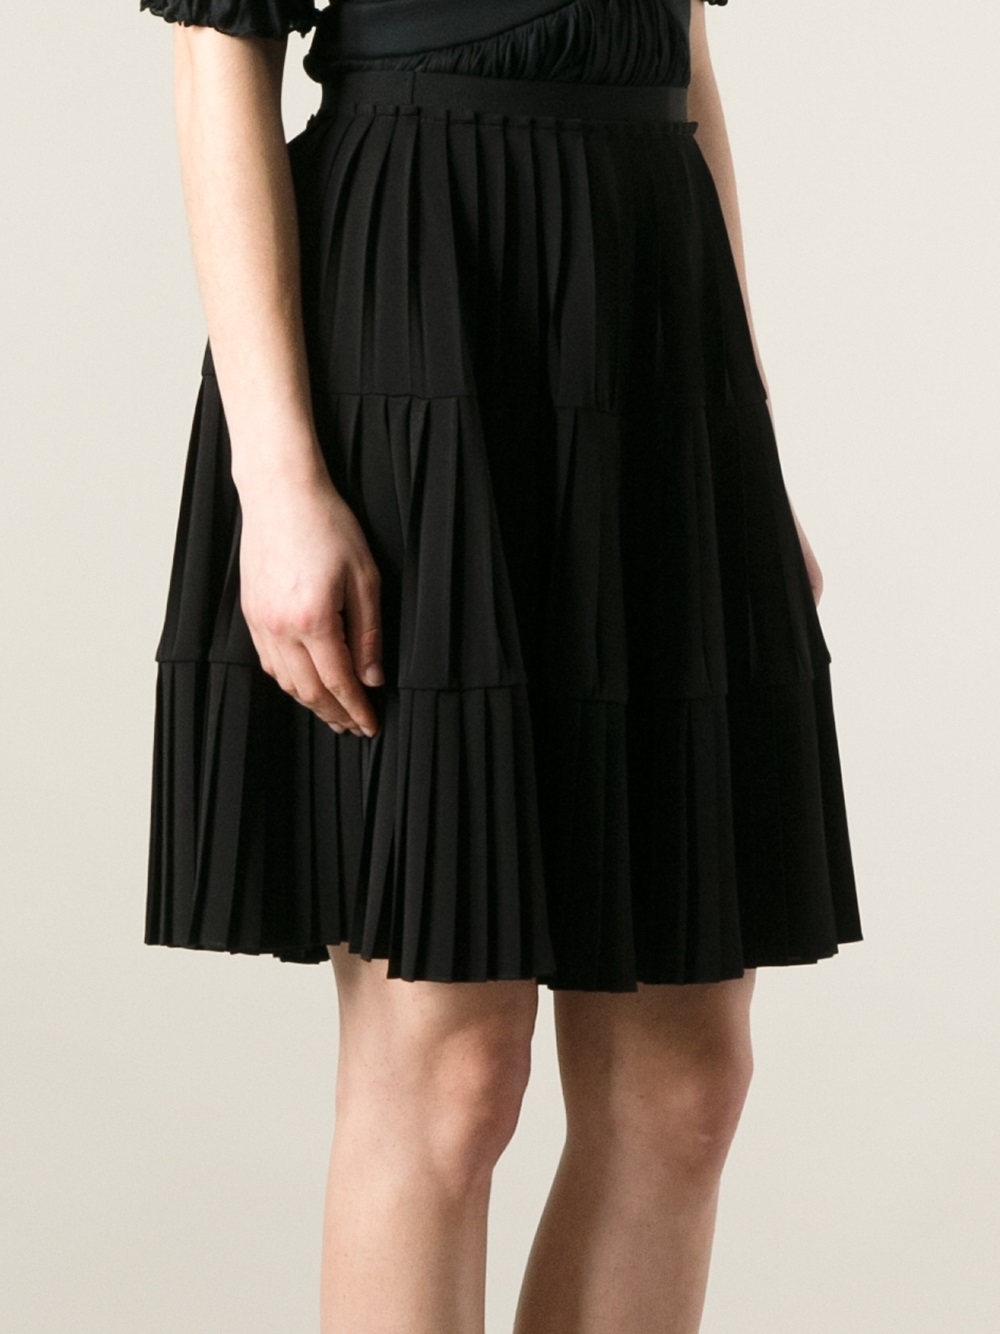 Lyst - Givenchy Pleated Skirt in Black